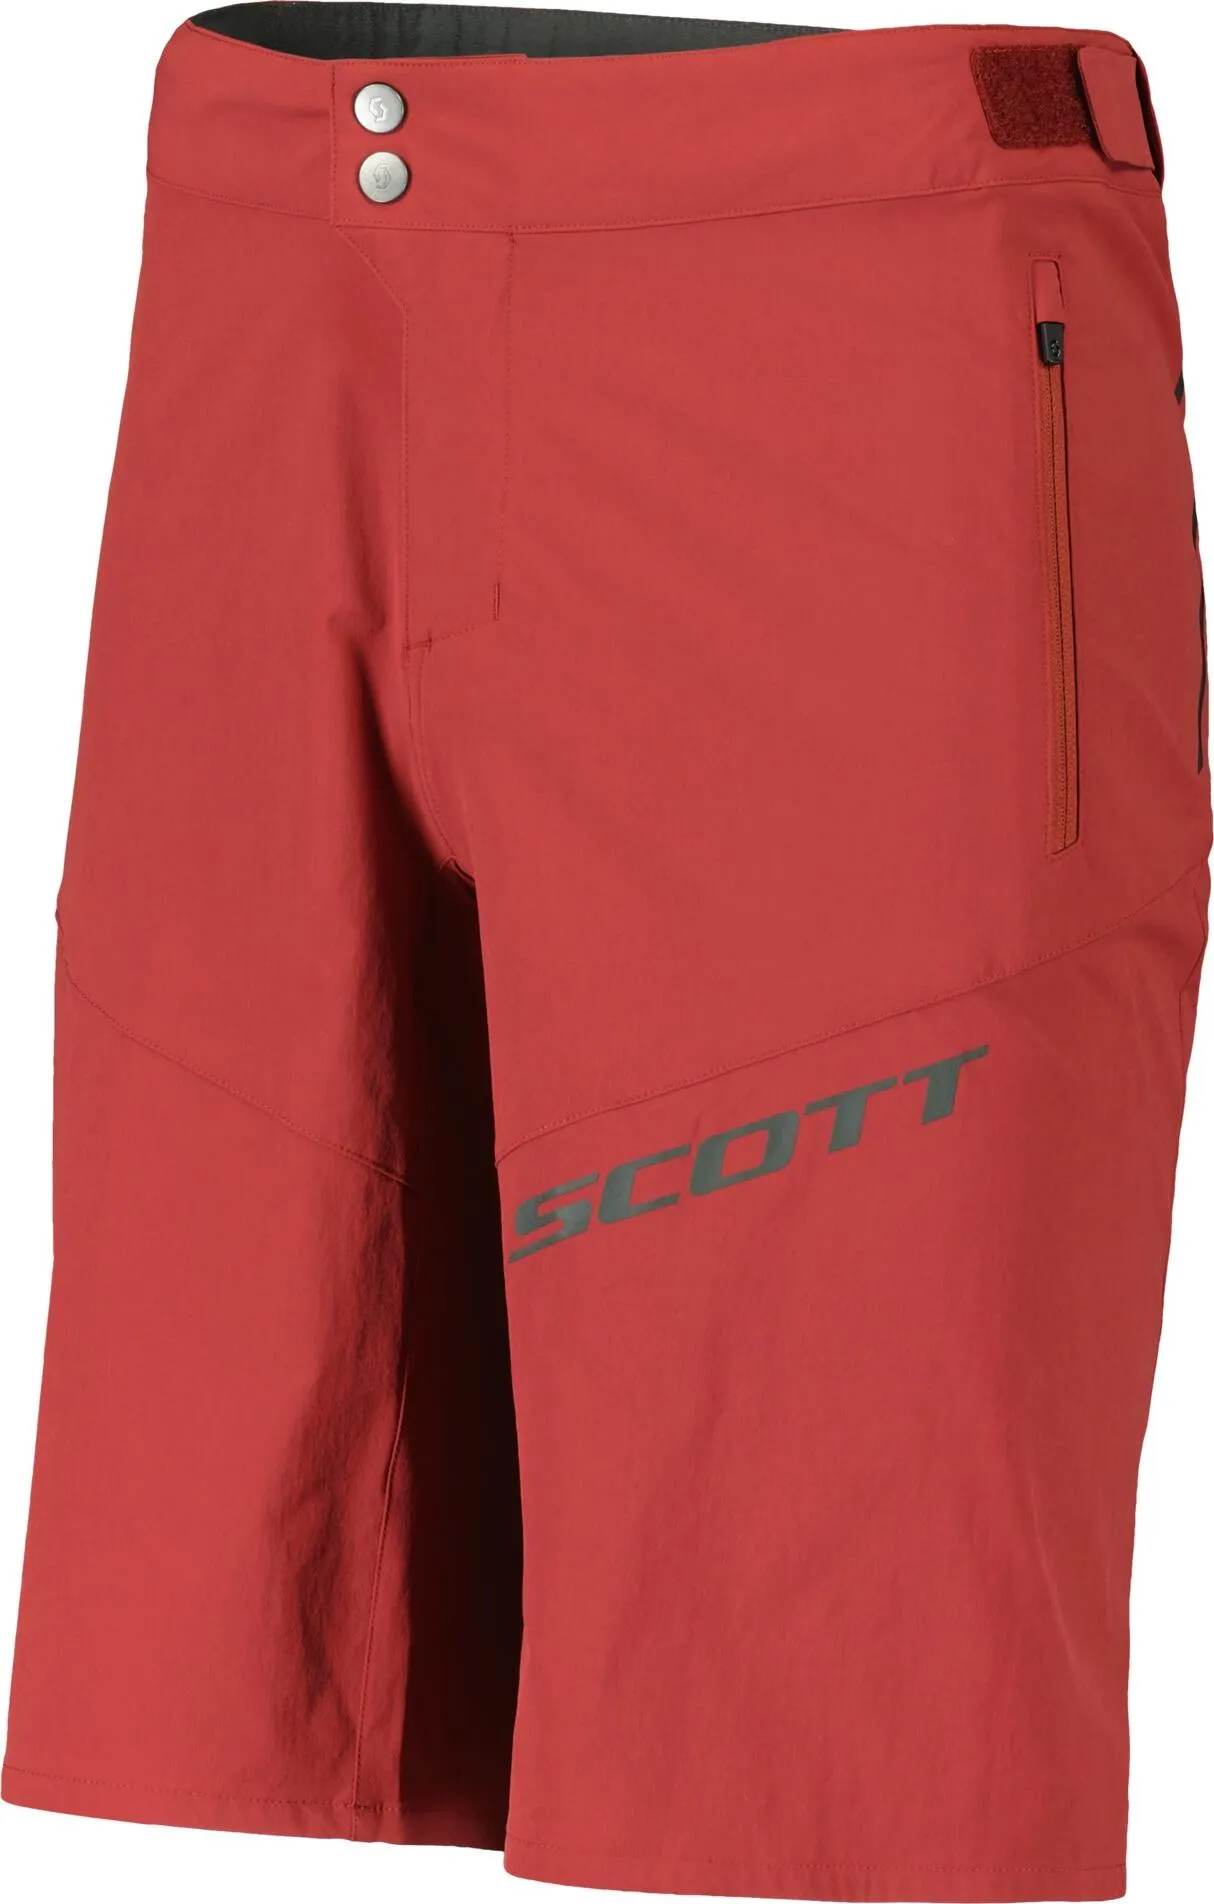 Scott Shorts M's Endurance With Pad tuscan red (7150) 3XL